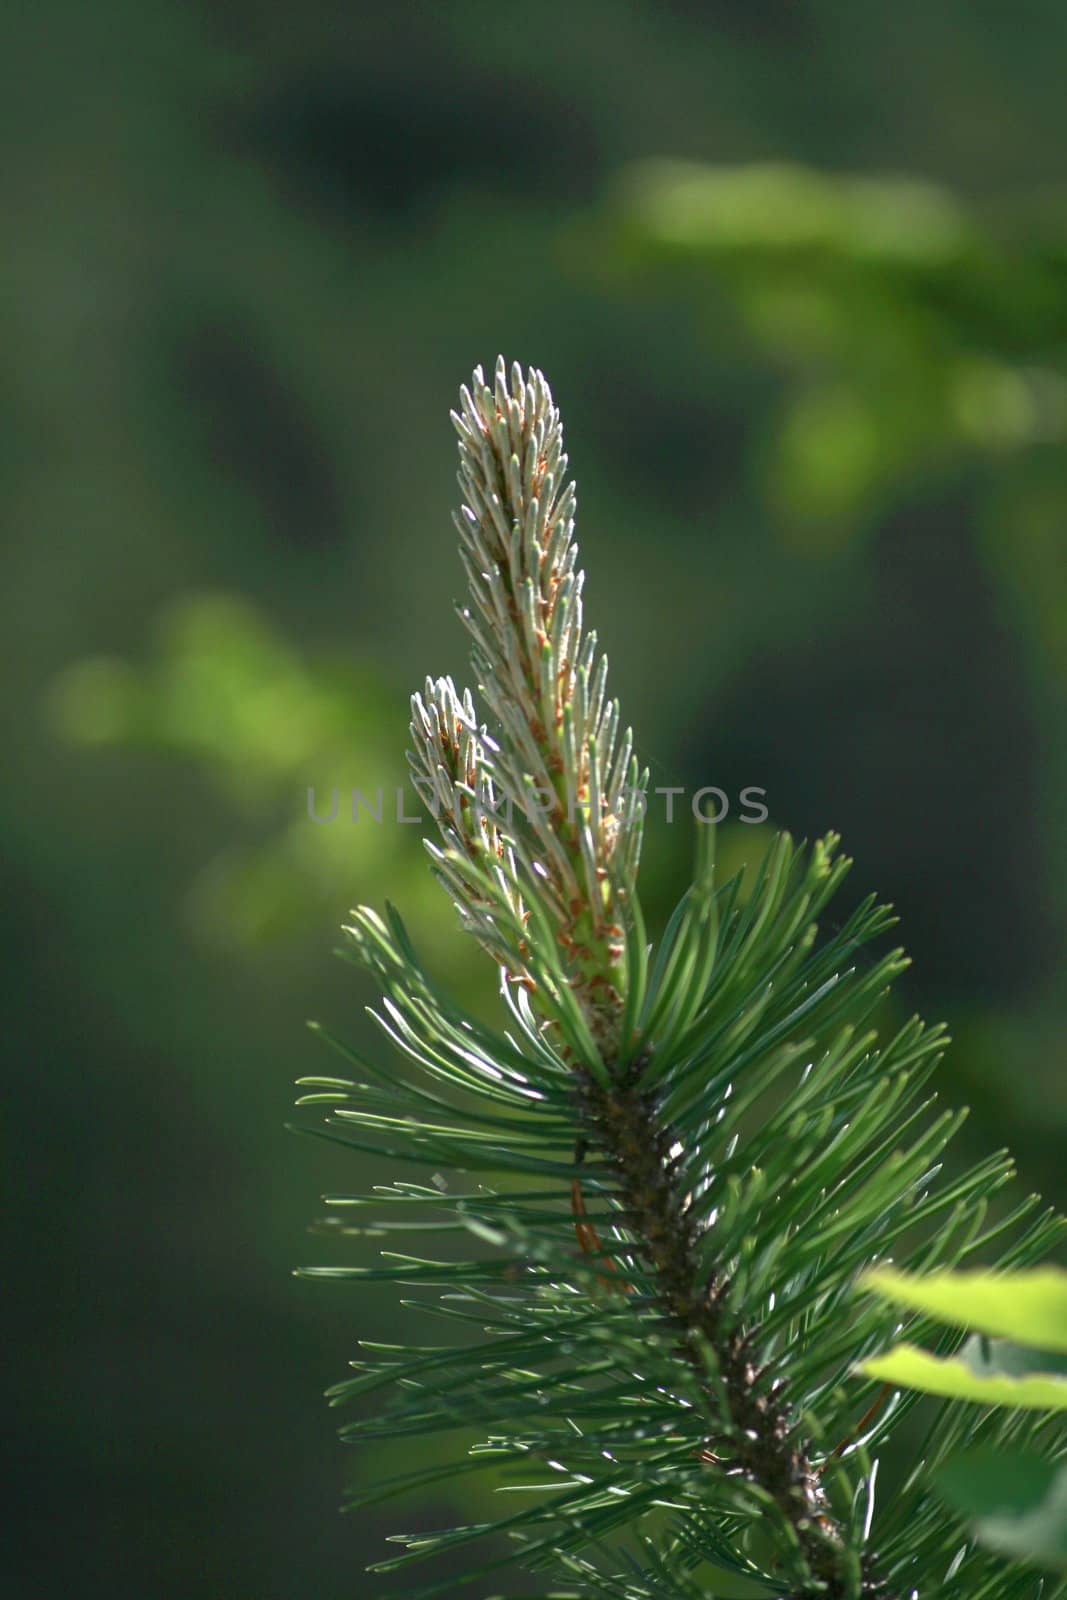 Desire of a spruce branch